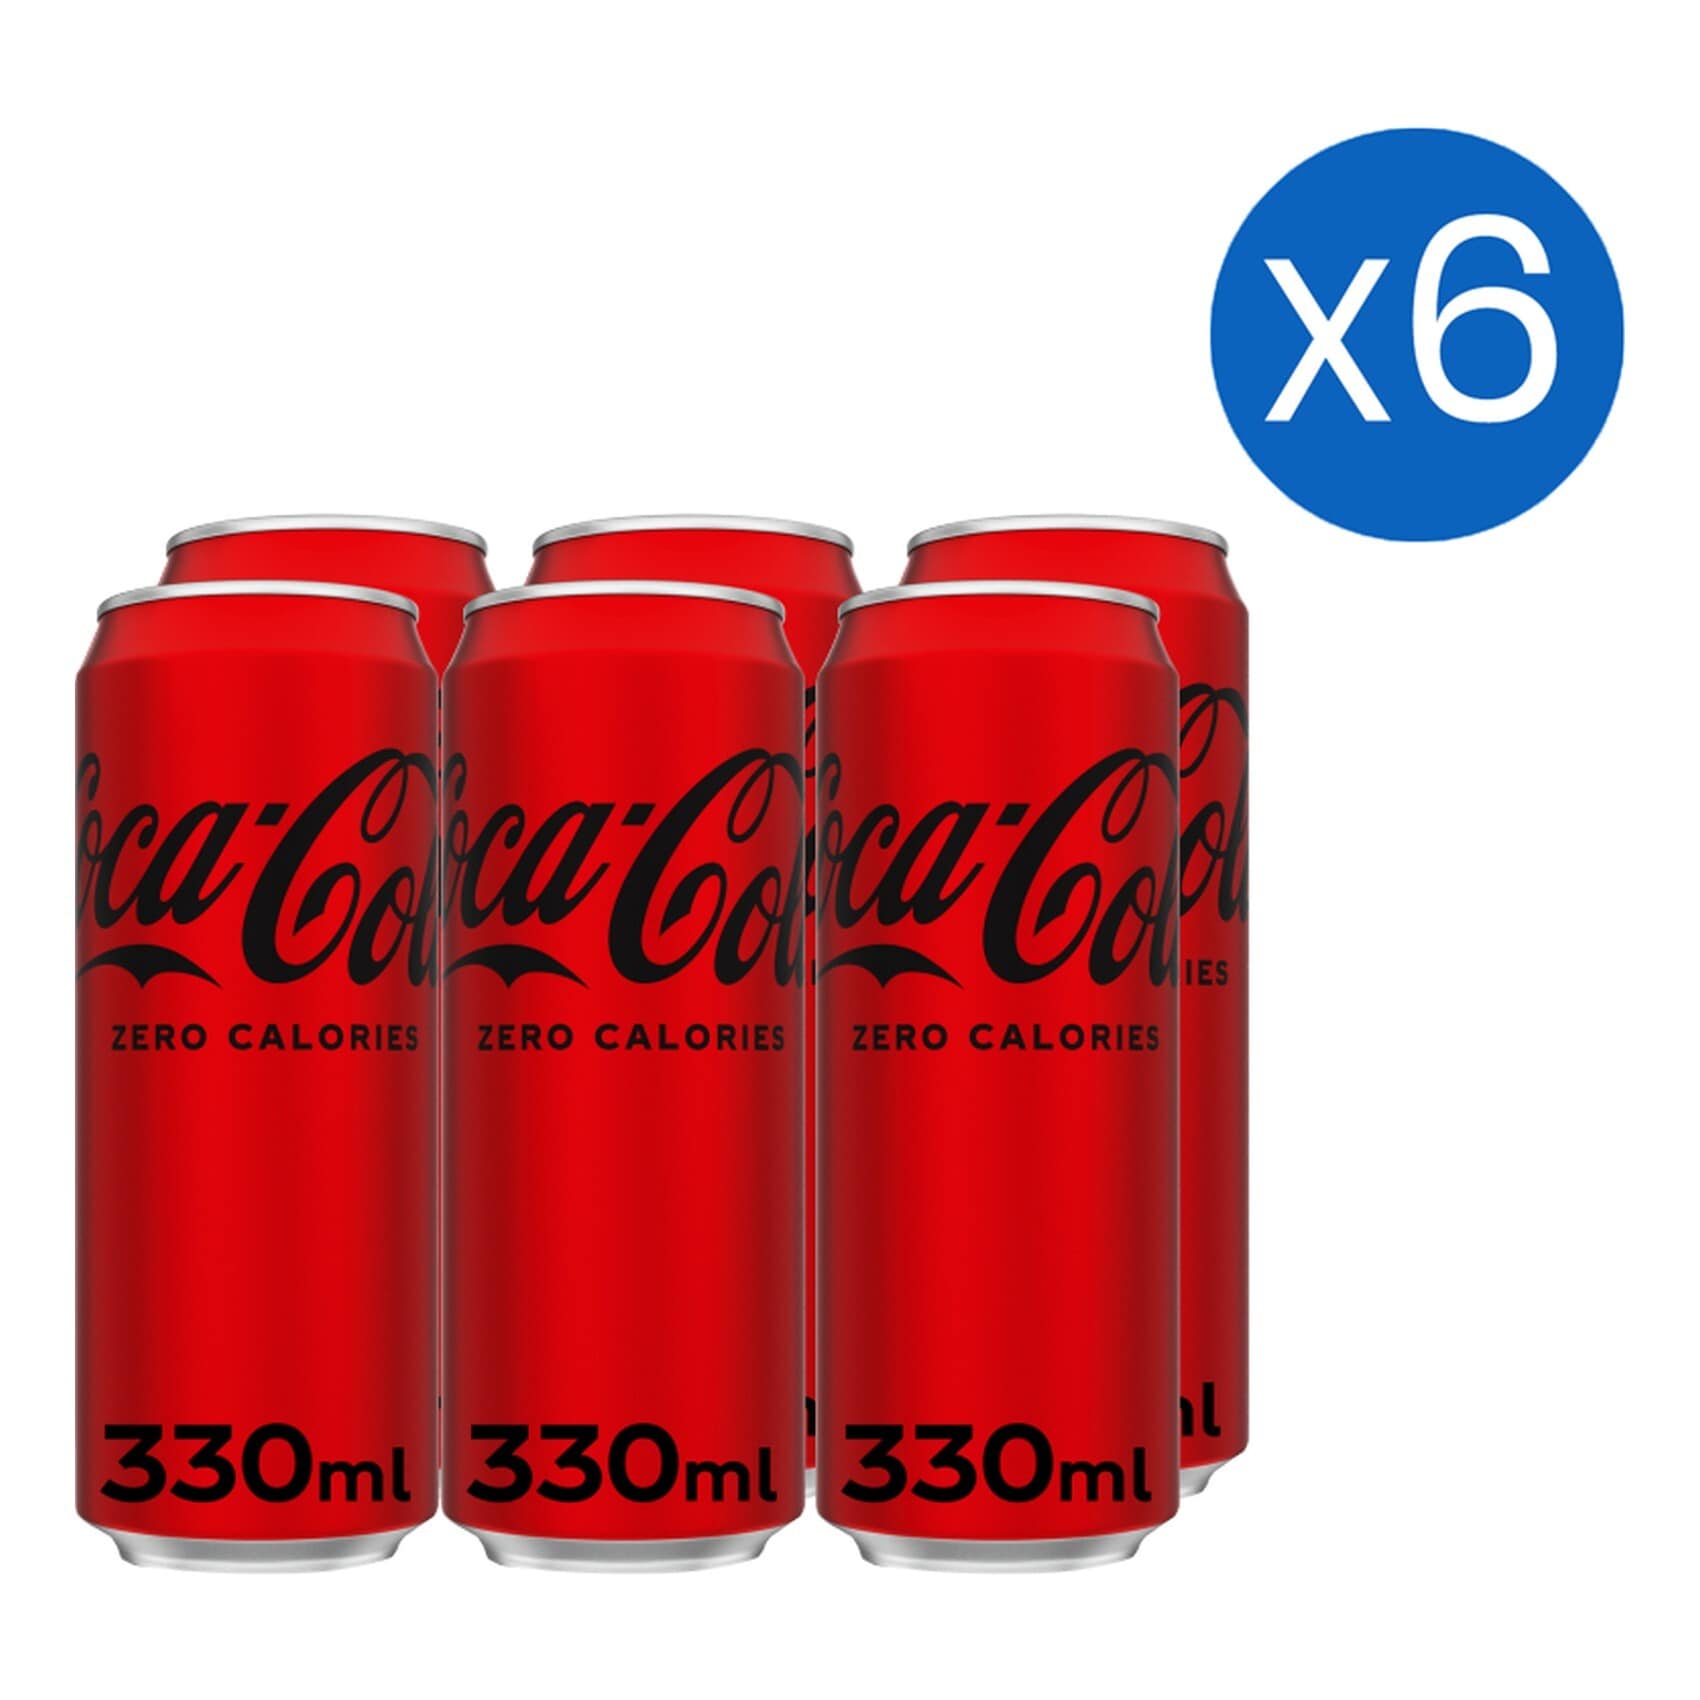 Buy Coca-Cola Zero Calories Carbonated Soft Drink Can 330ml Pack